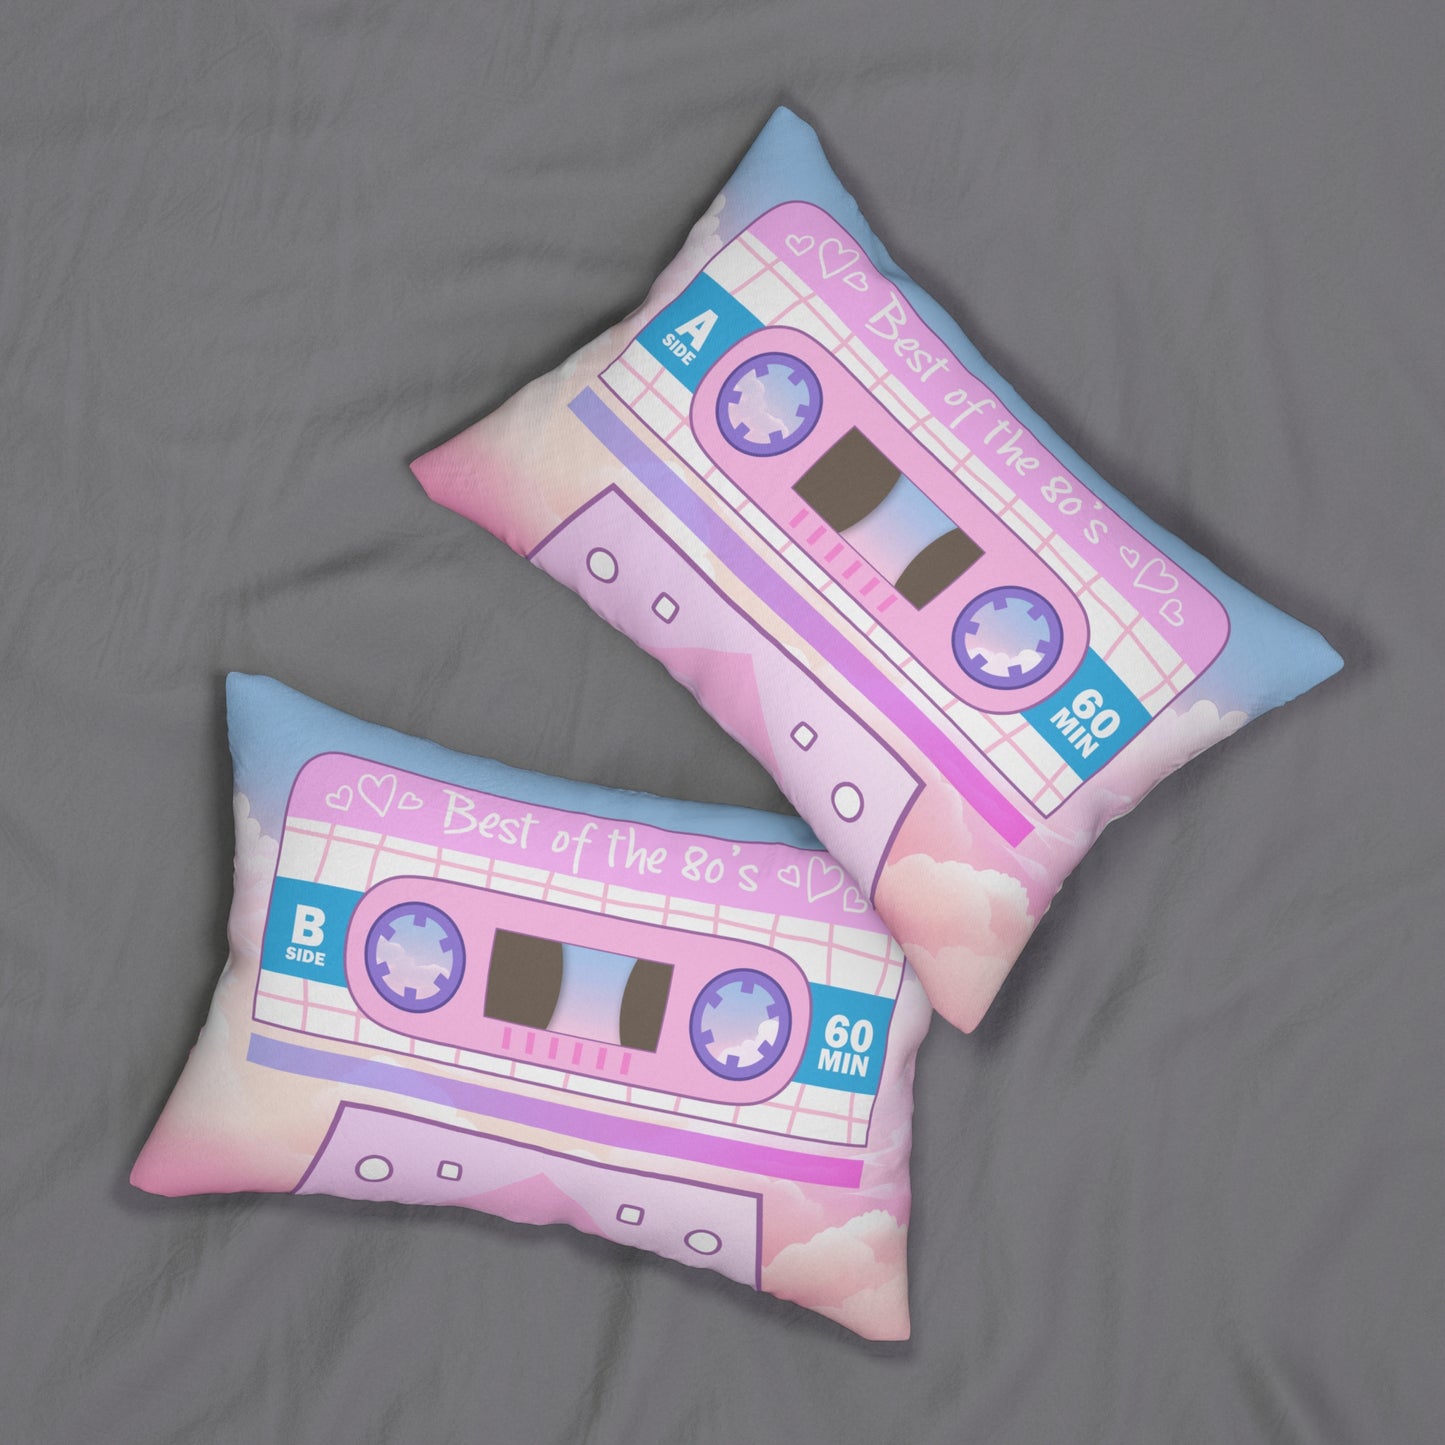 Mix Tape Pillow - Best of the 80's